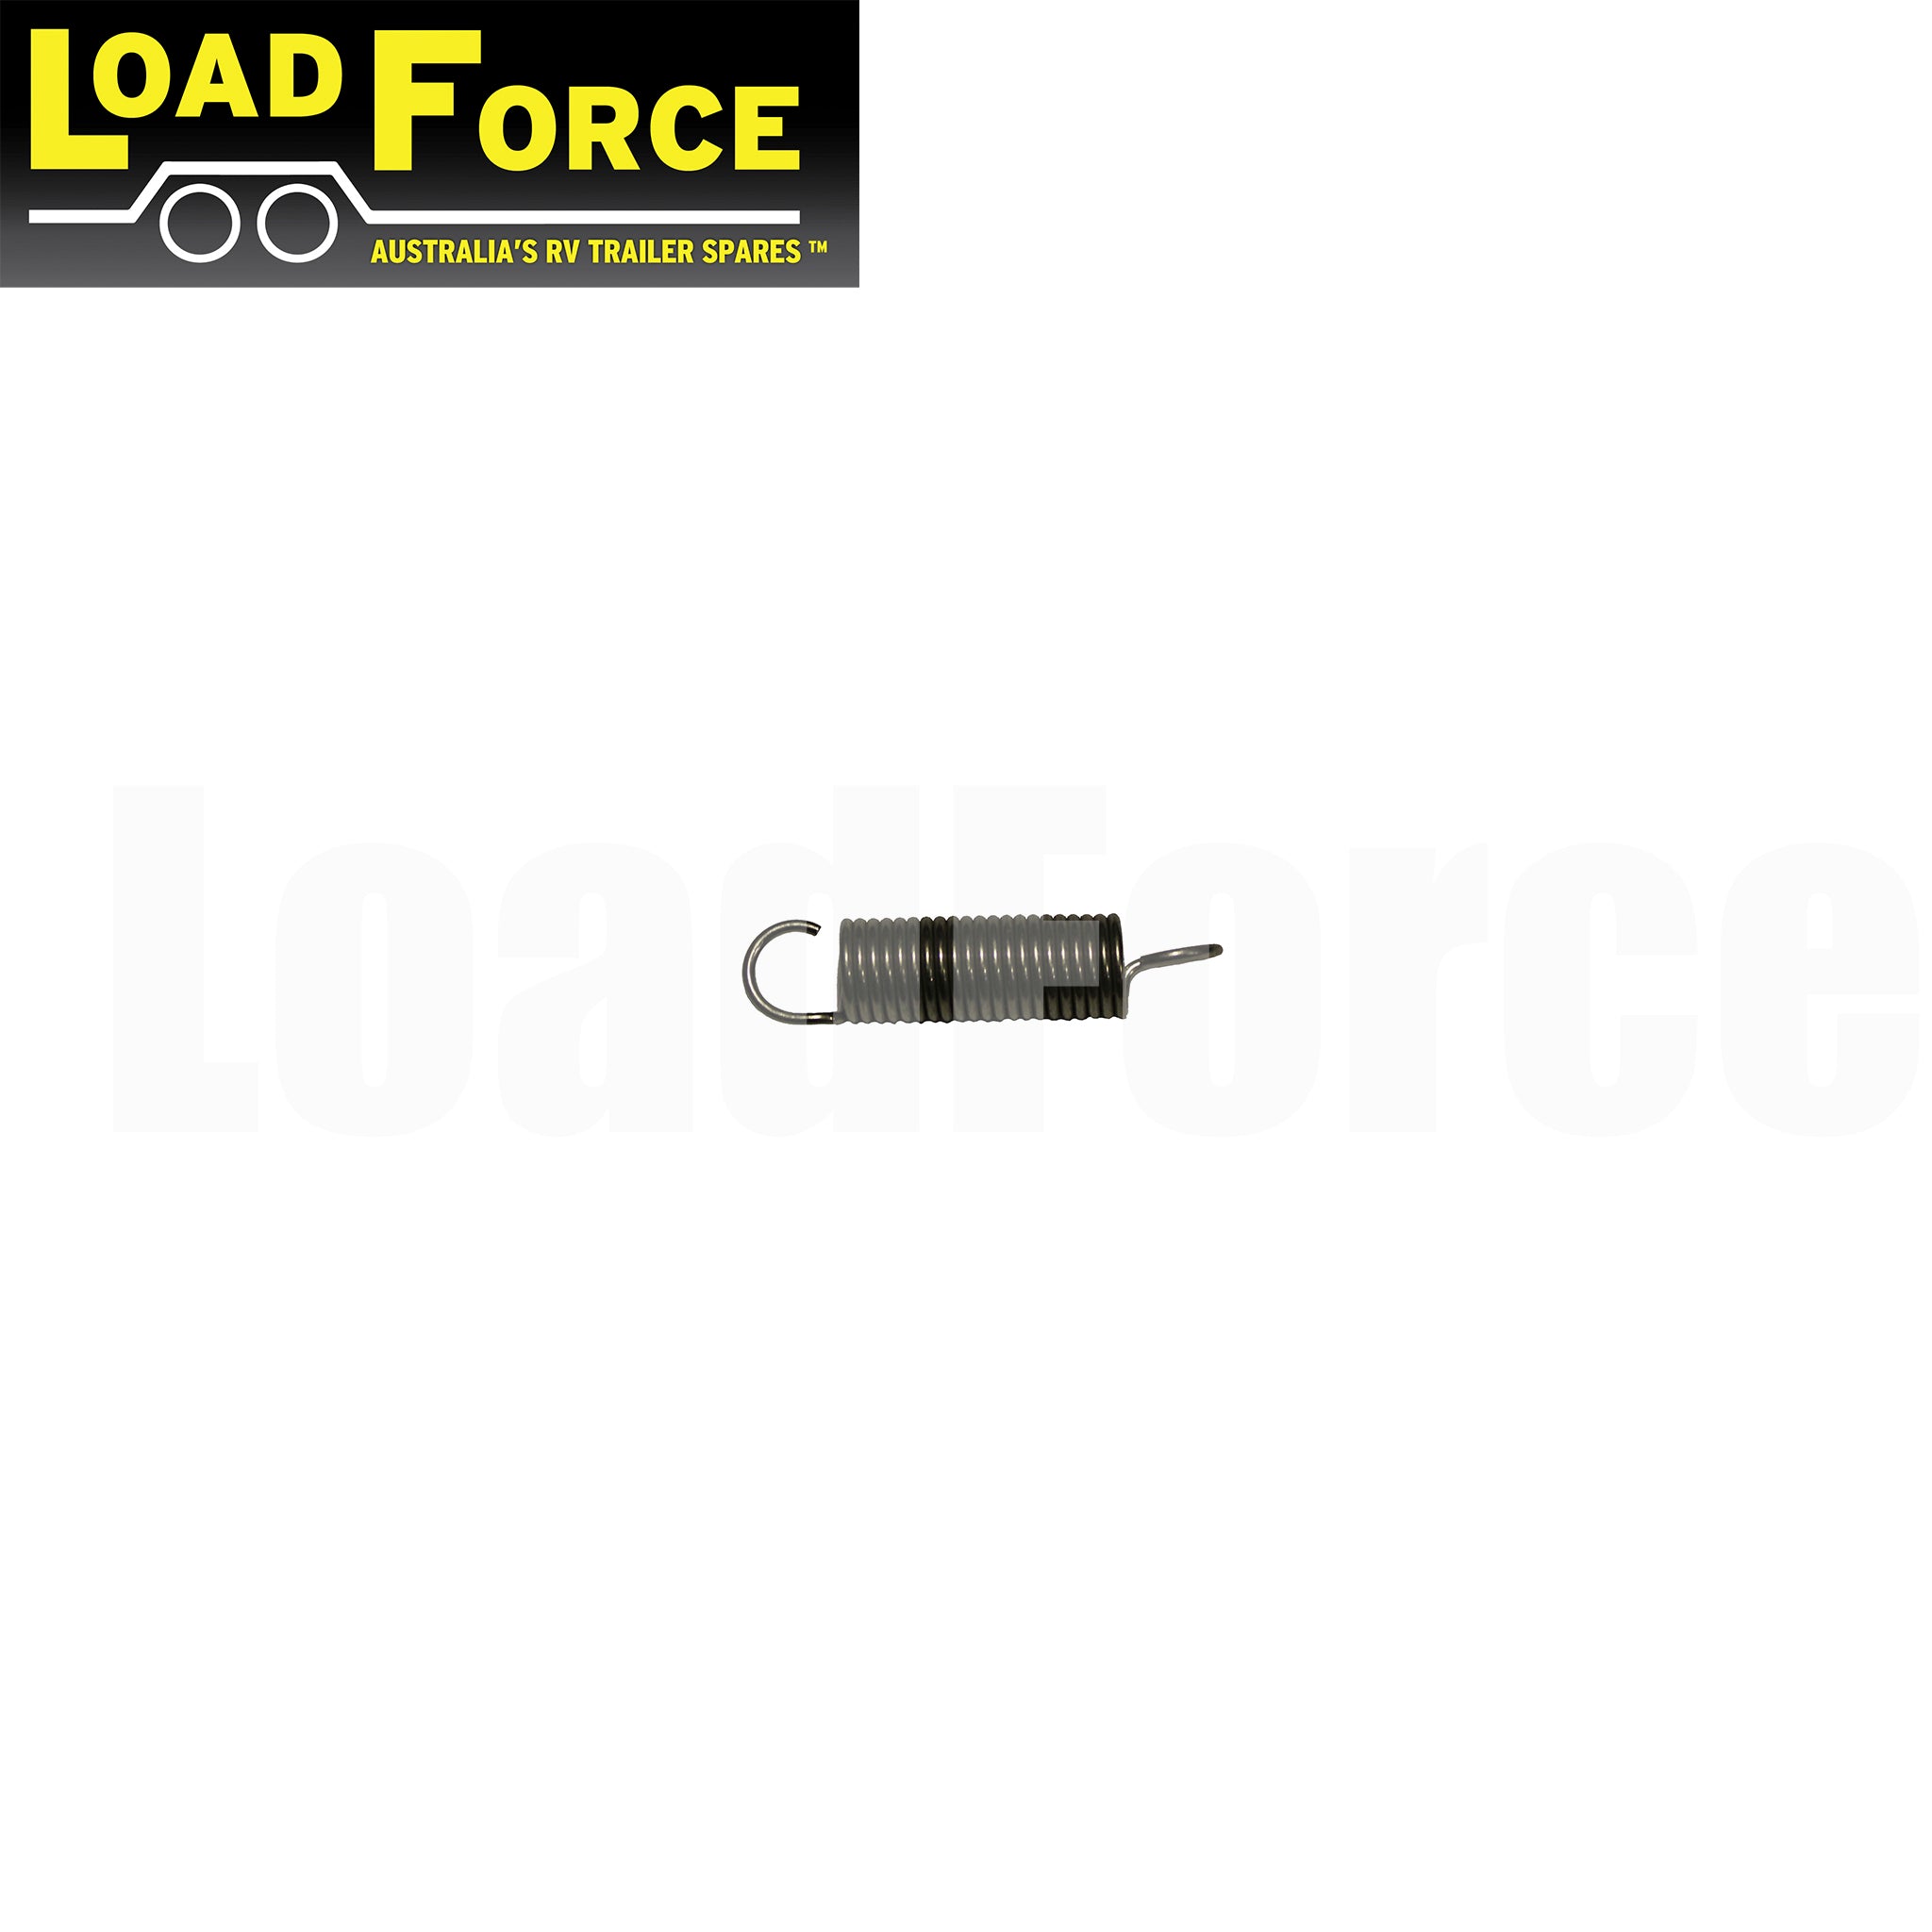 Stainless return spring for LoadForce TA100 and A100 mechanical caliper